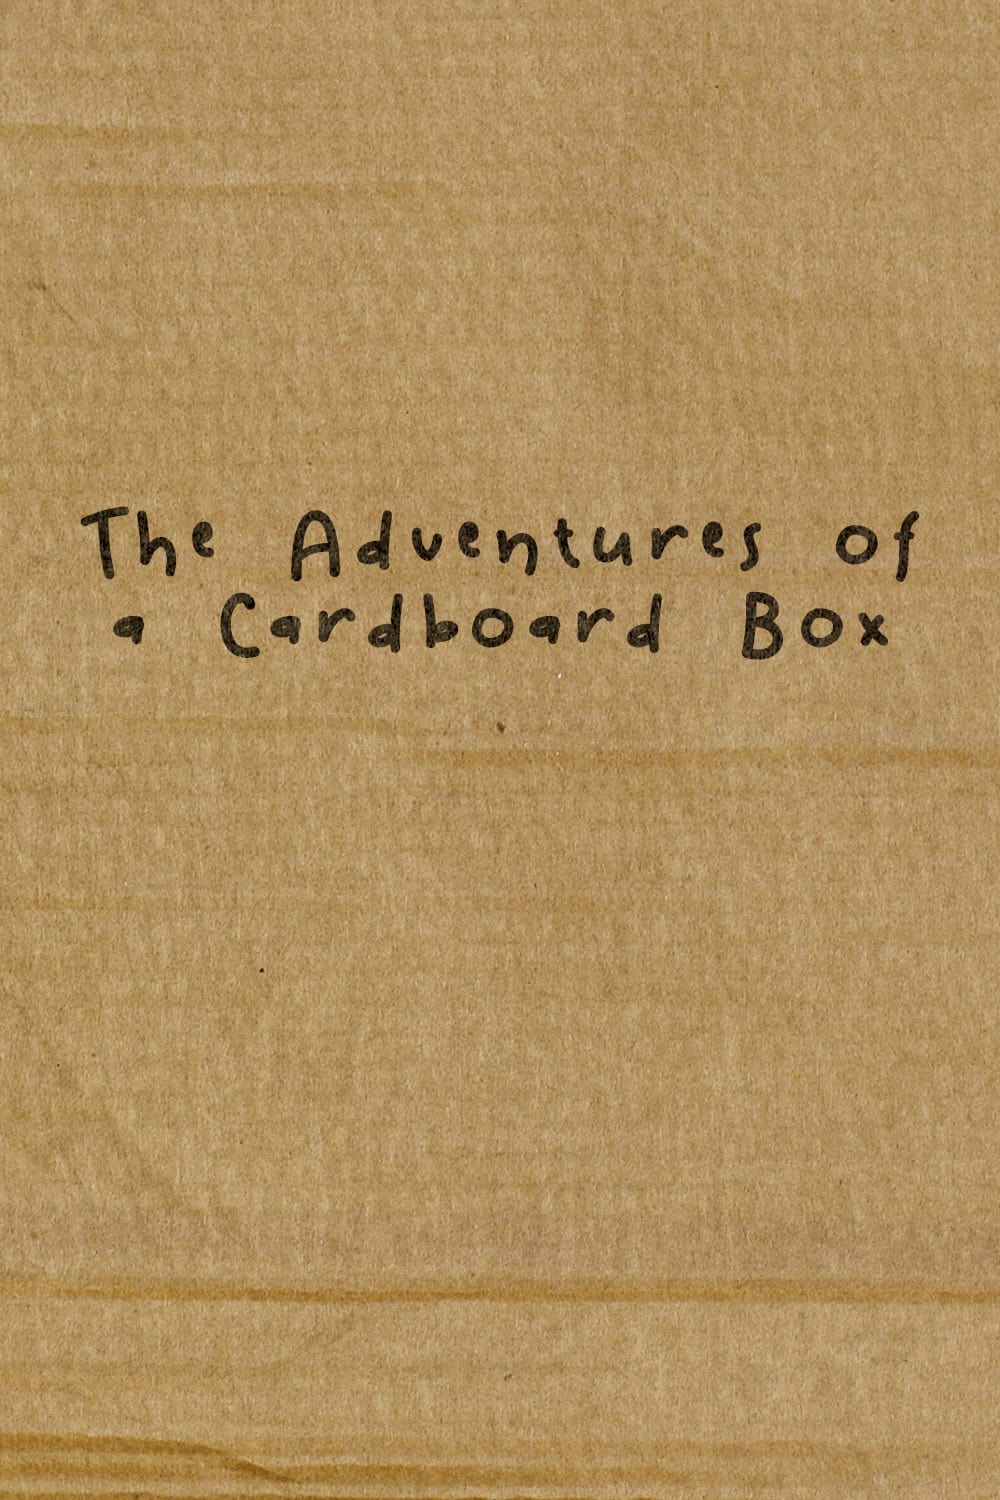 The Adventures of a Cardboard Box